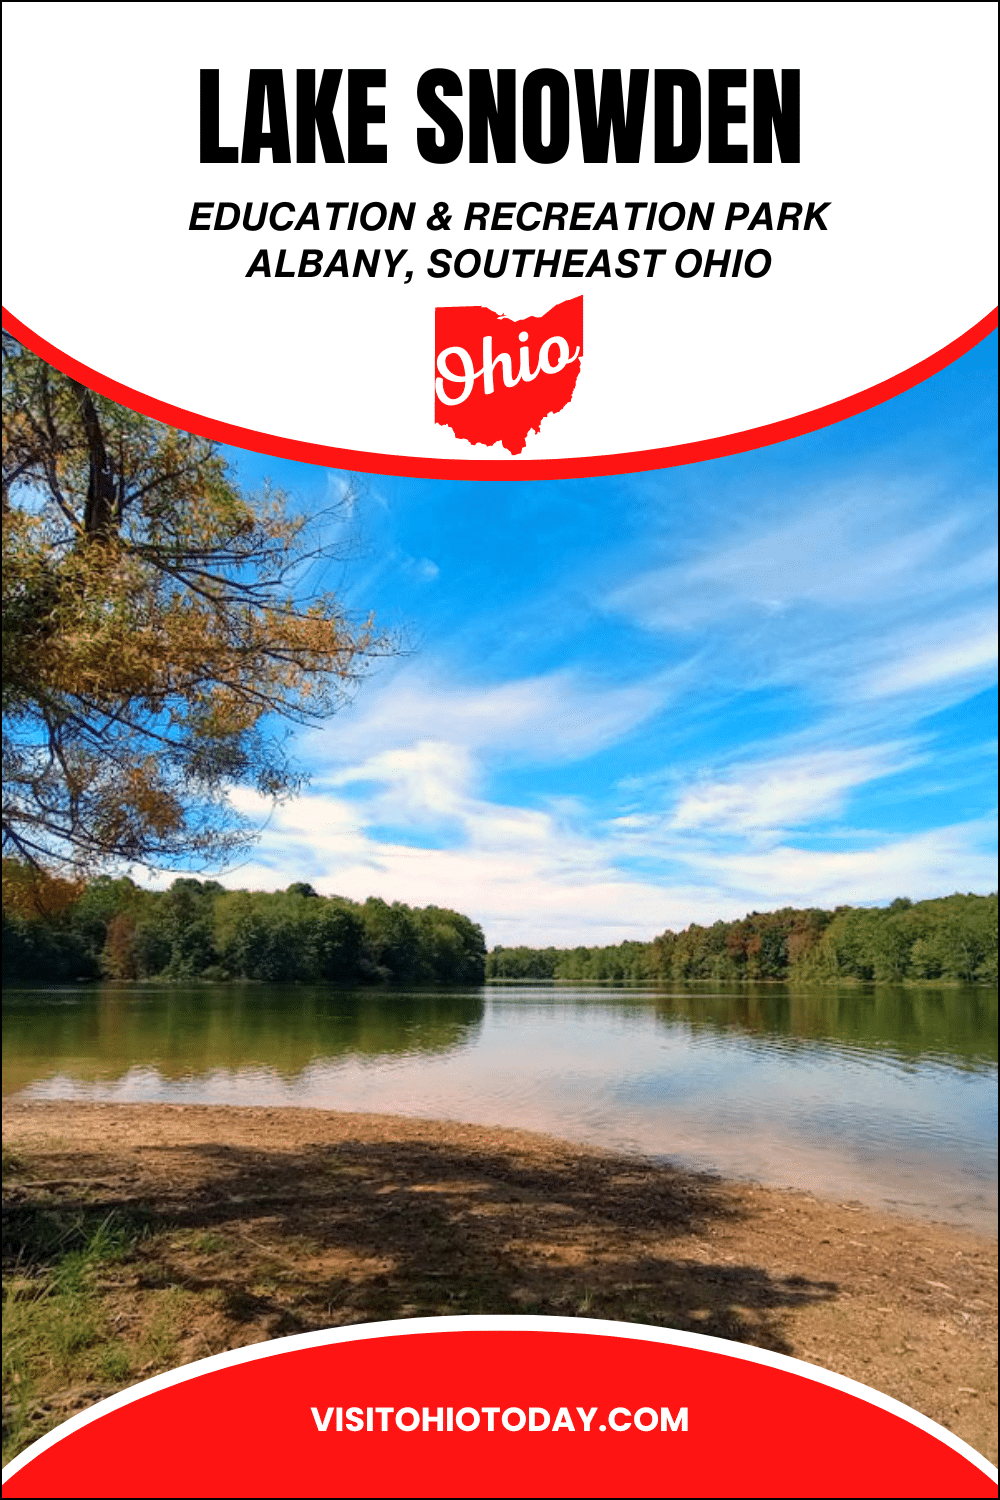 Lake Snowden is a 675 acre education and recreation park located in Southeast Ohio. It offers a campground and many outdoor activities. | Lake Snowden | Ohio Stays | Albany Ohio